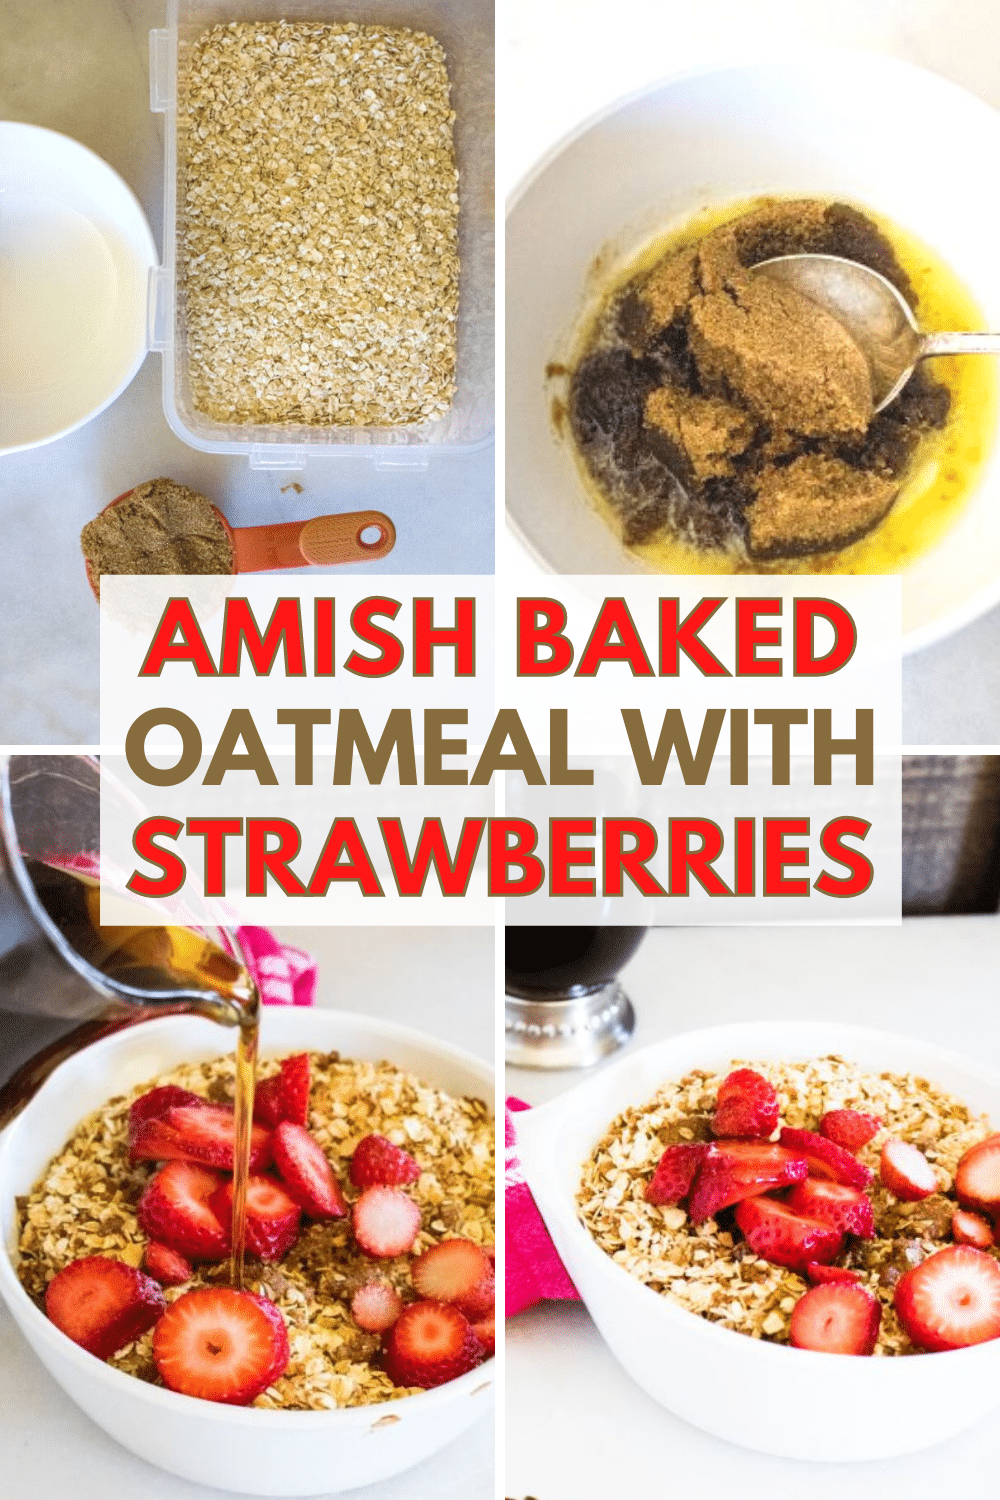 Amish Baked Oatmeal Topped with Strawberries is a delicious recipe for breakfast or brunch. It also only has 5 ingredients and is very simple to make. #oatmeal #amishrecipe #breakfast #strawberries via @wondermomwannab